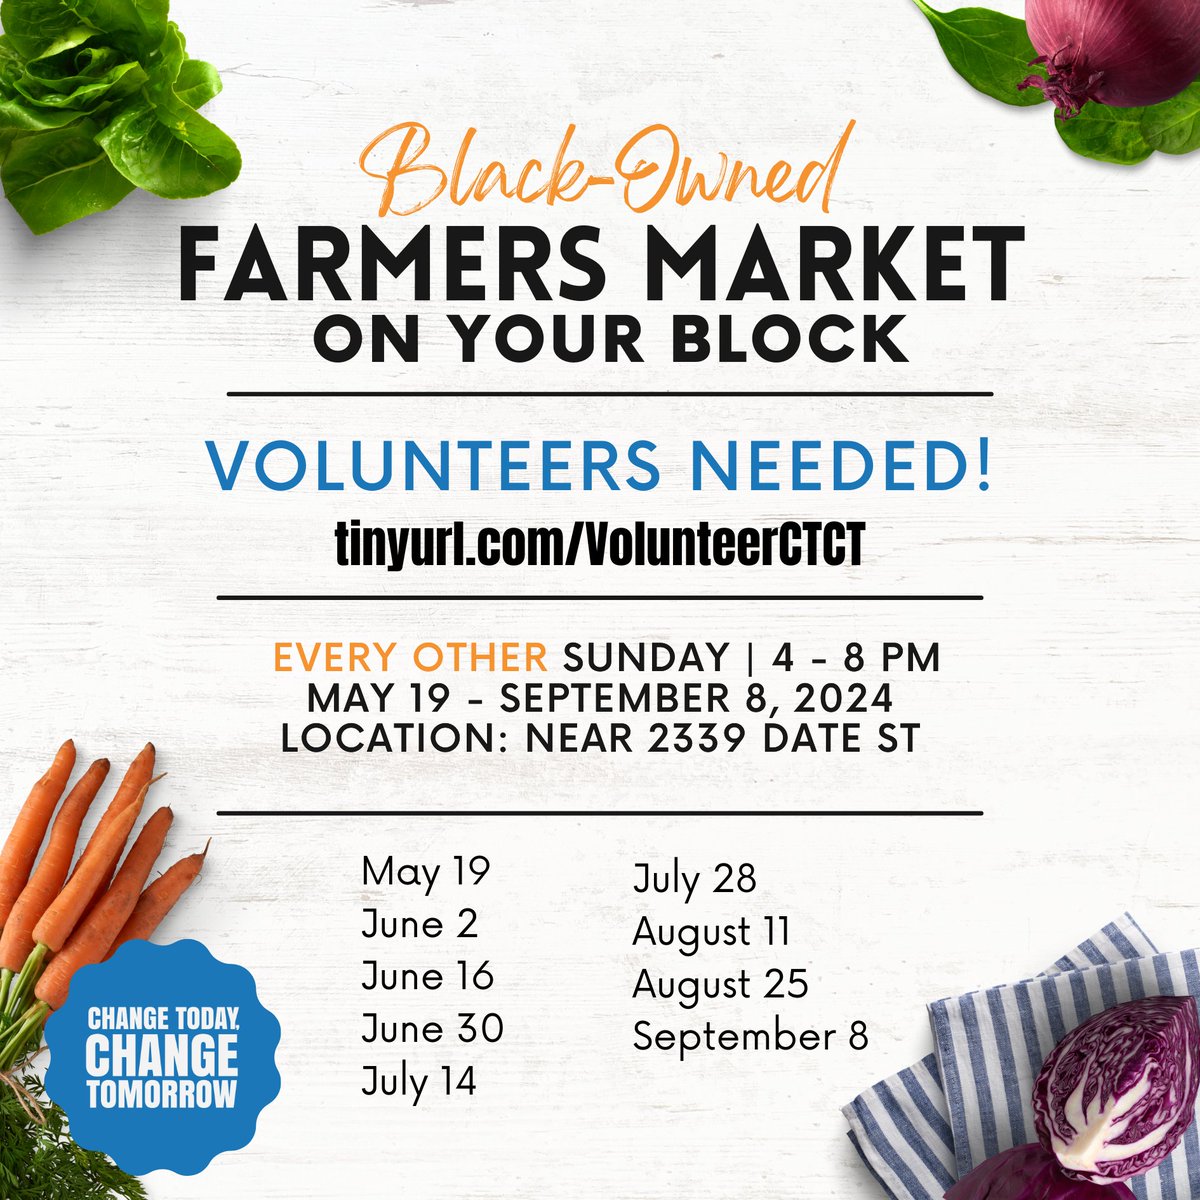 Looking for a chance to tap into your #CommUNITY?! Volunteer at the Black-Owned Farmers Market! Visit tinyurl.com/VolunteerCTCT to sign up and see more opportunities.